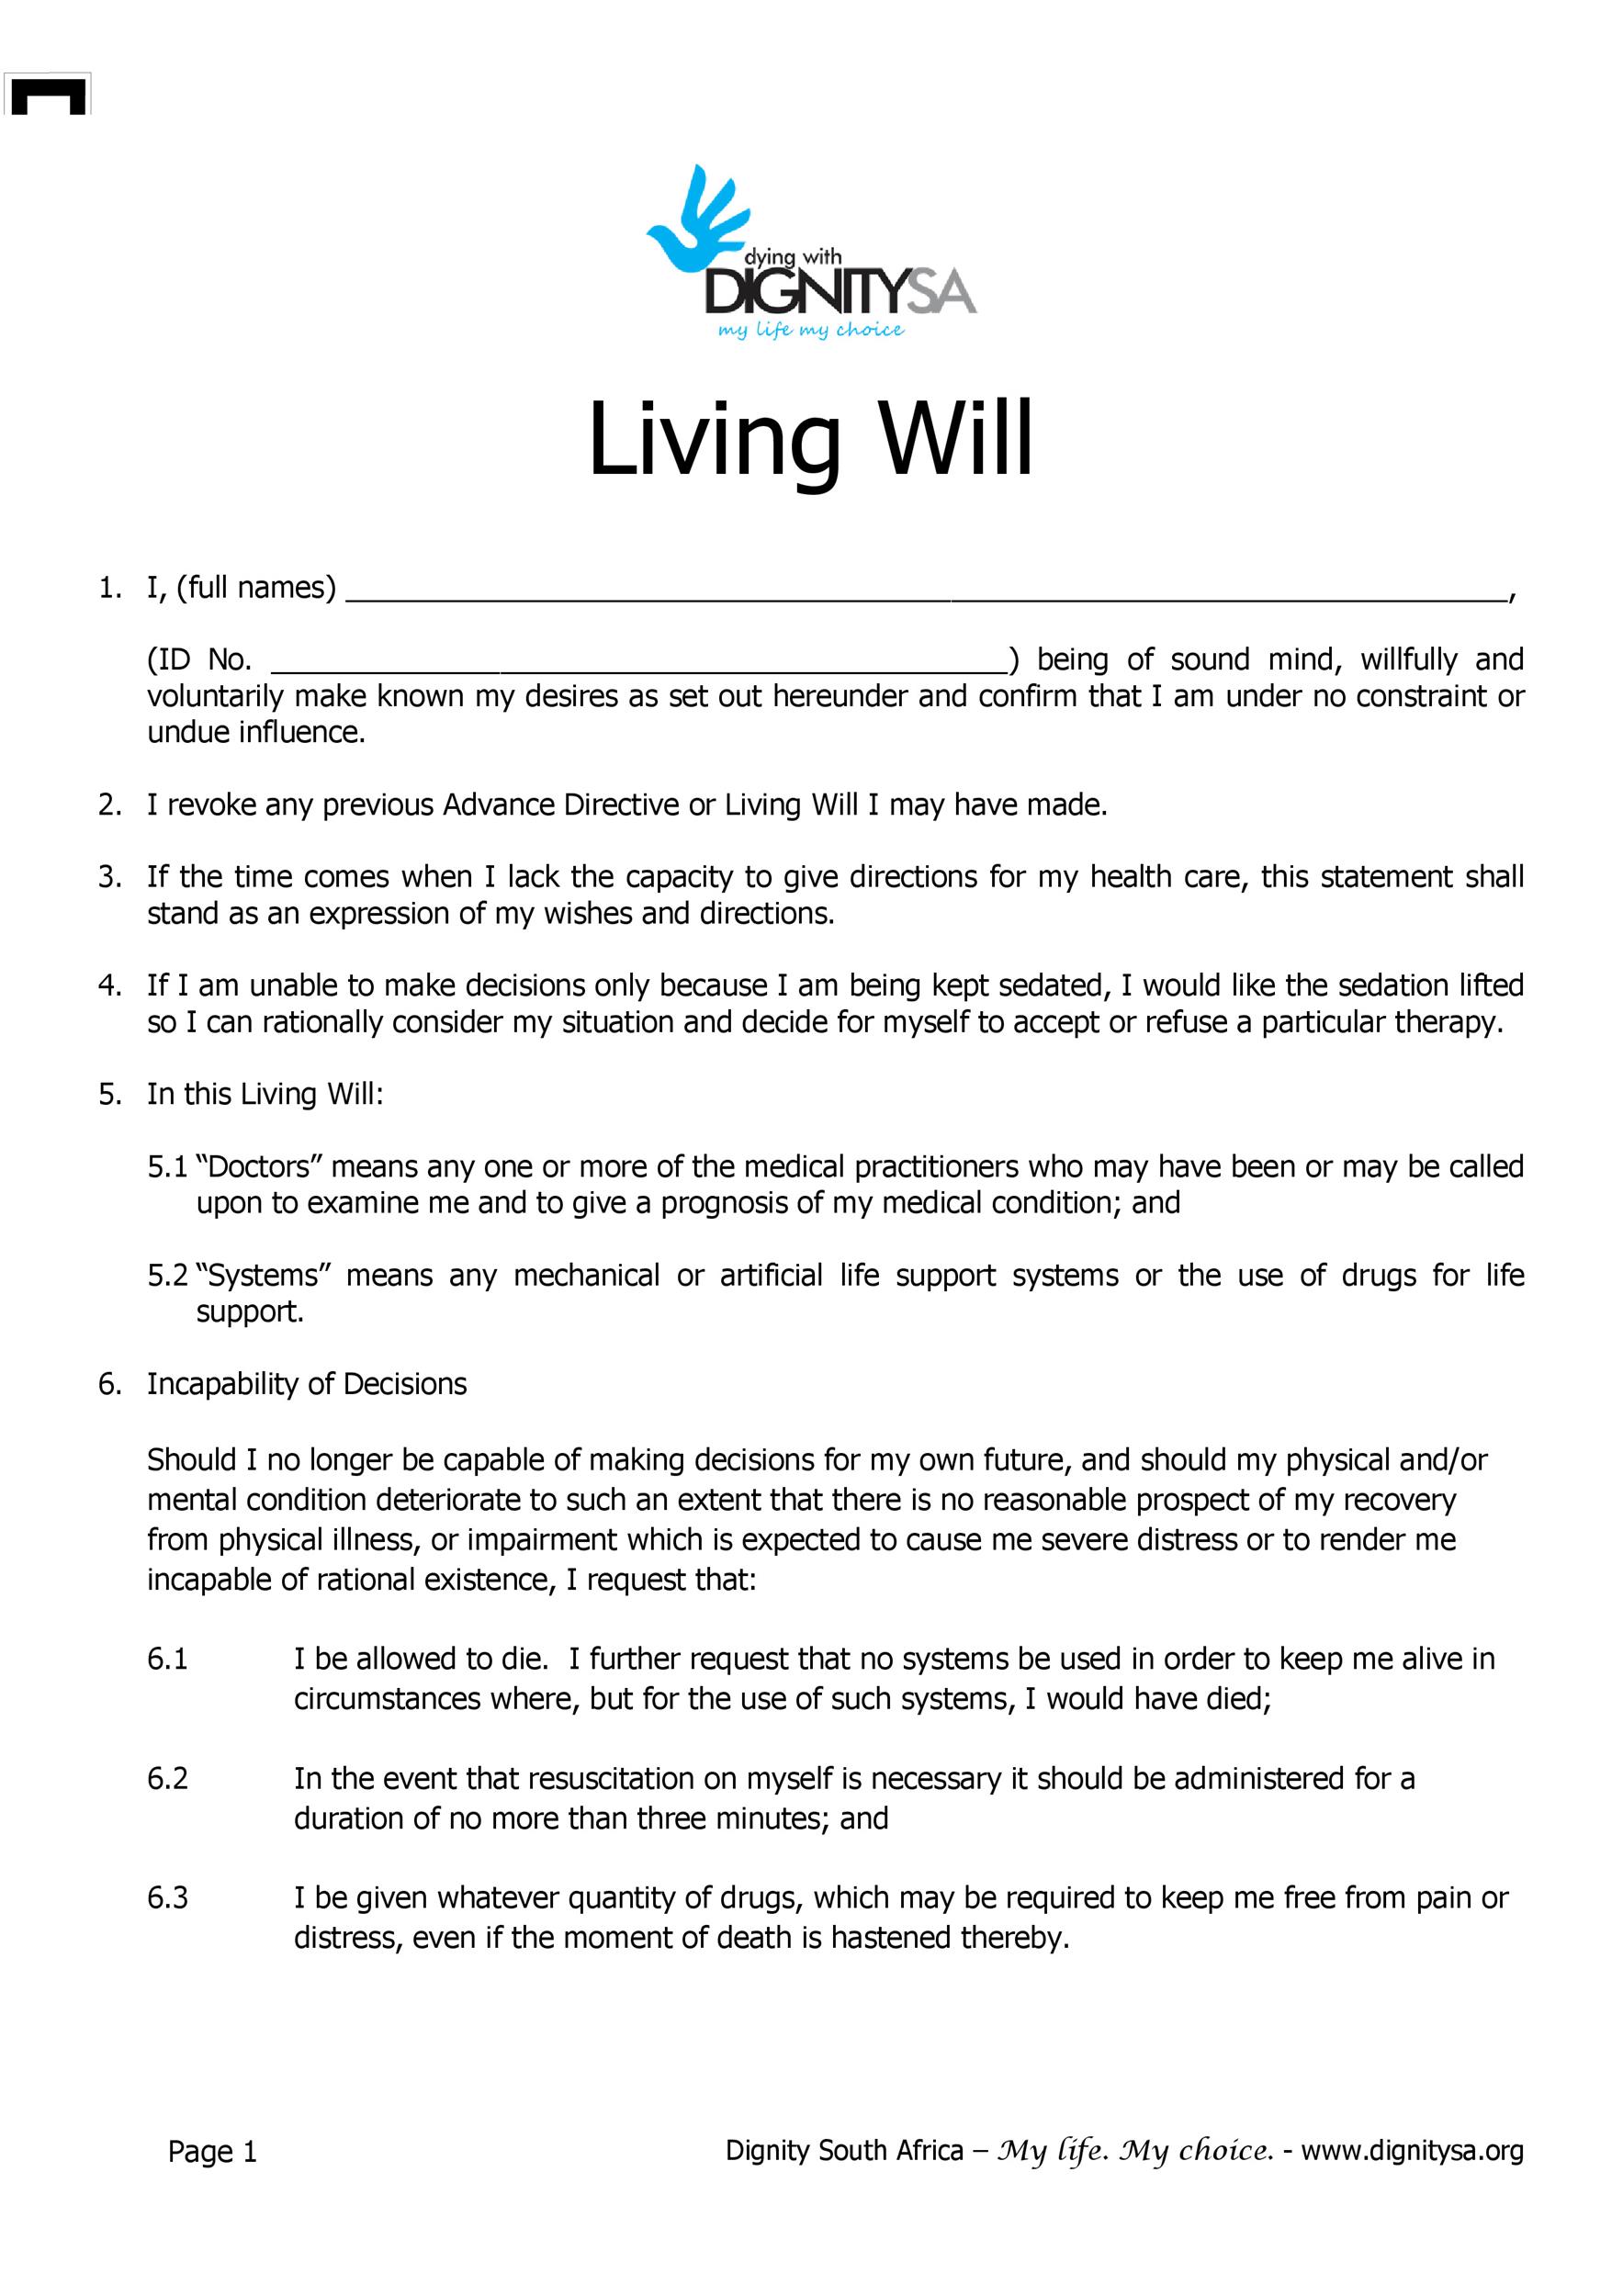 50 Free Living Will Templates Forms ALL STATES ᐅ TemplateLab